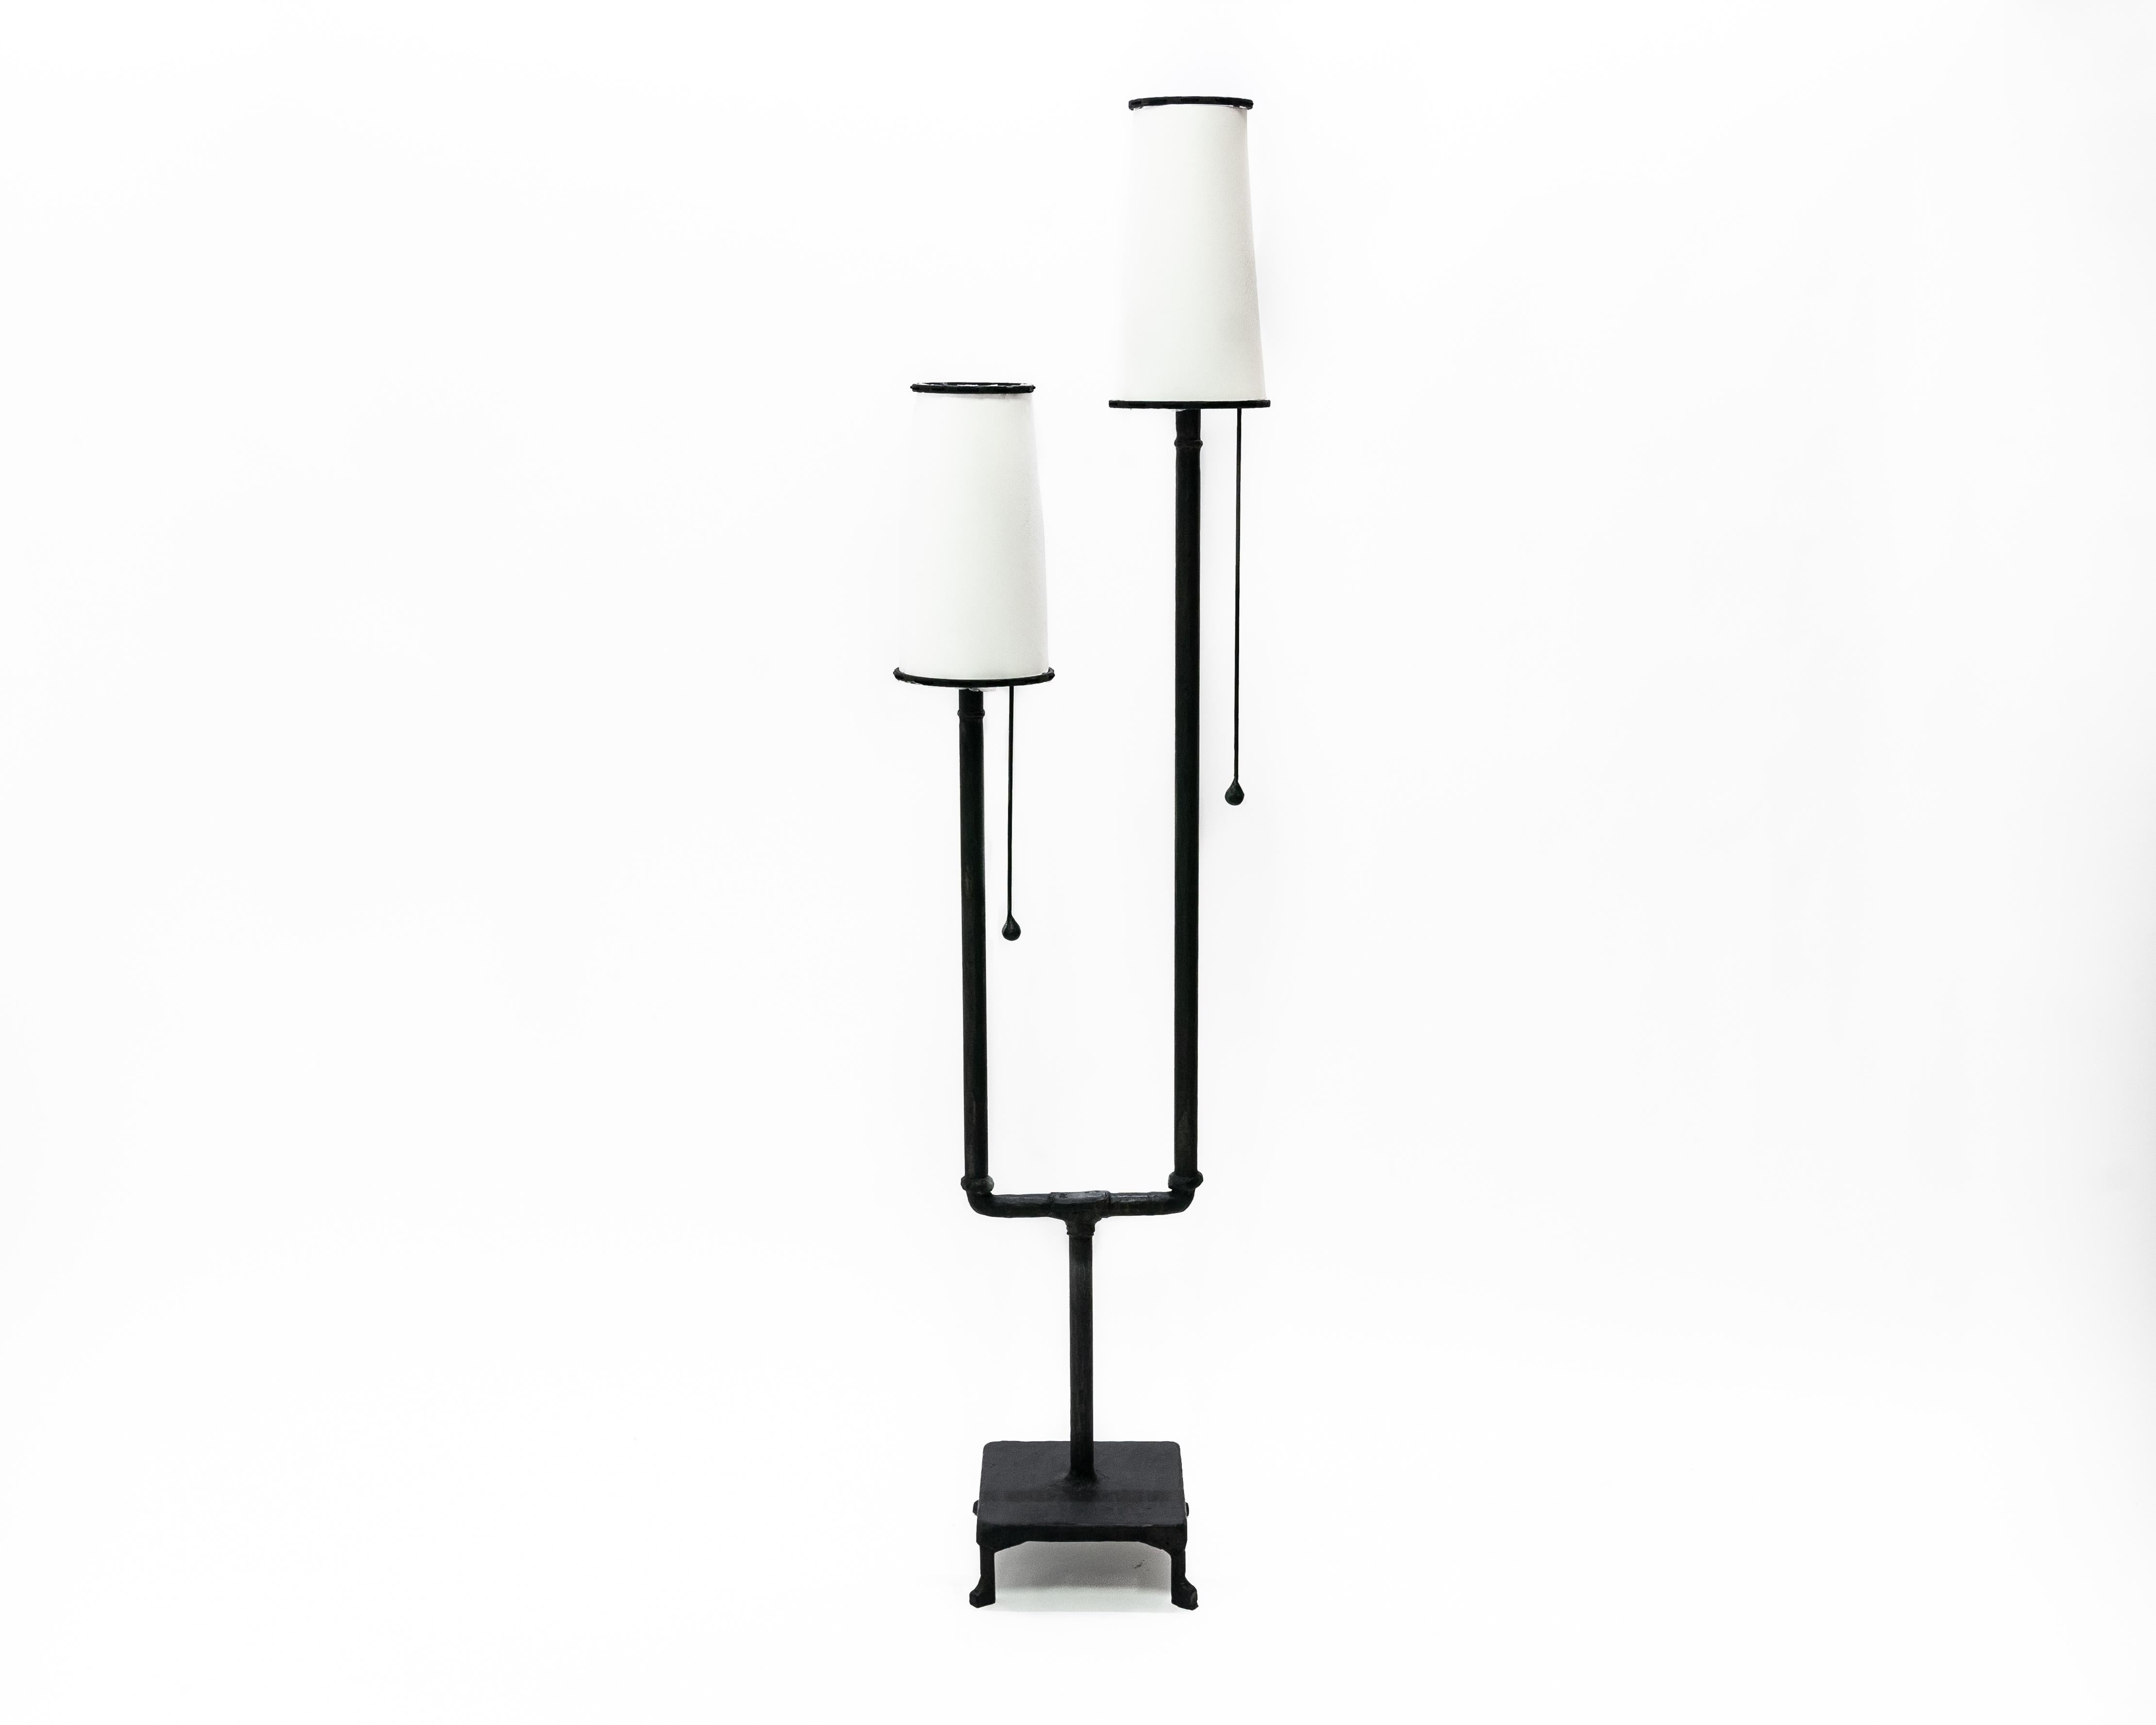 Floor Lamp No. 2 by JM Szymanski
Materials: Blackened steel, waxed finish, parchment shade
Dimensions: square base 28 x W 15.3 x H 190.5 cm 

A unique floor lamp with dual lamp shades brings depth to any room it’s in.

Jake Szymanski lives and